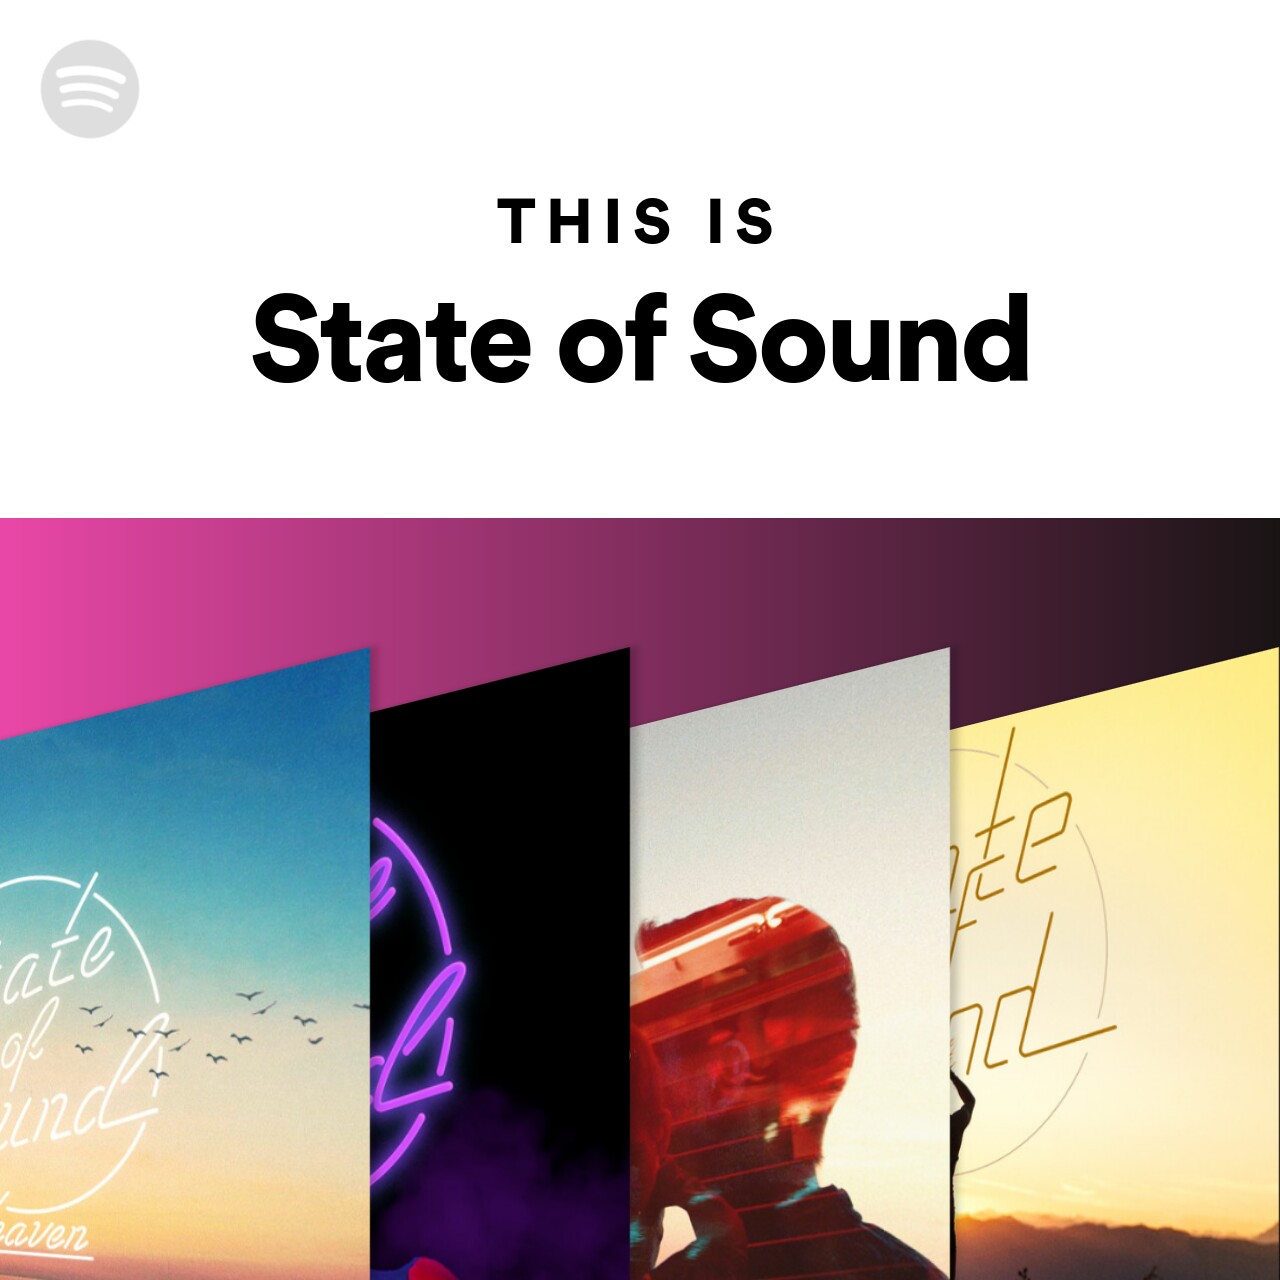 This Is State of Sound